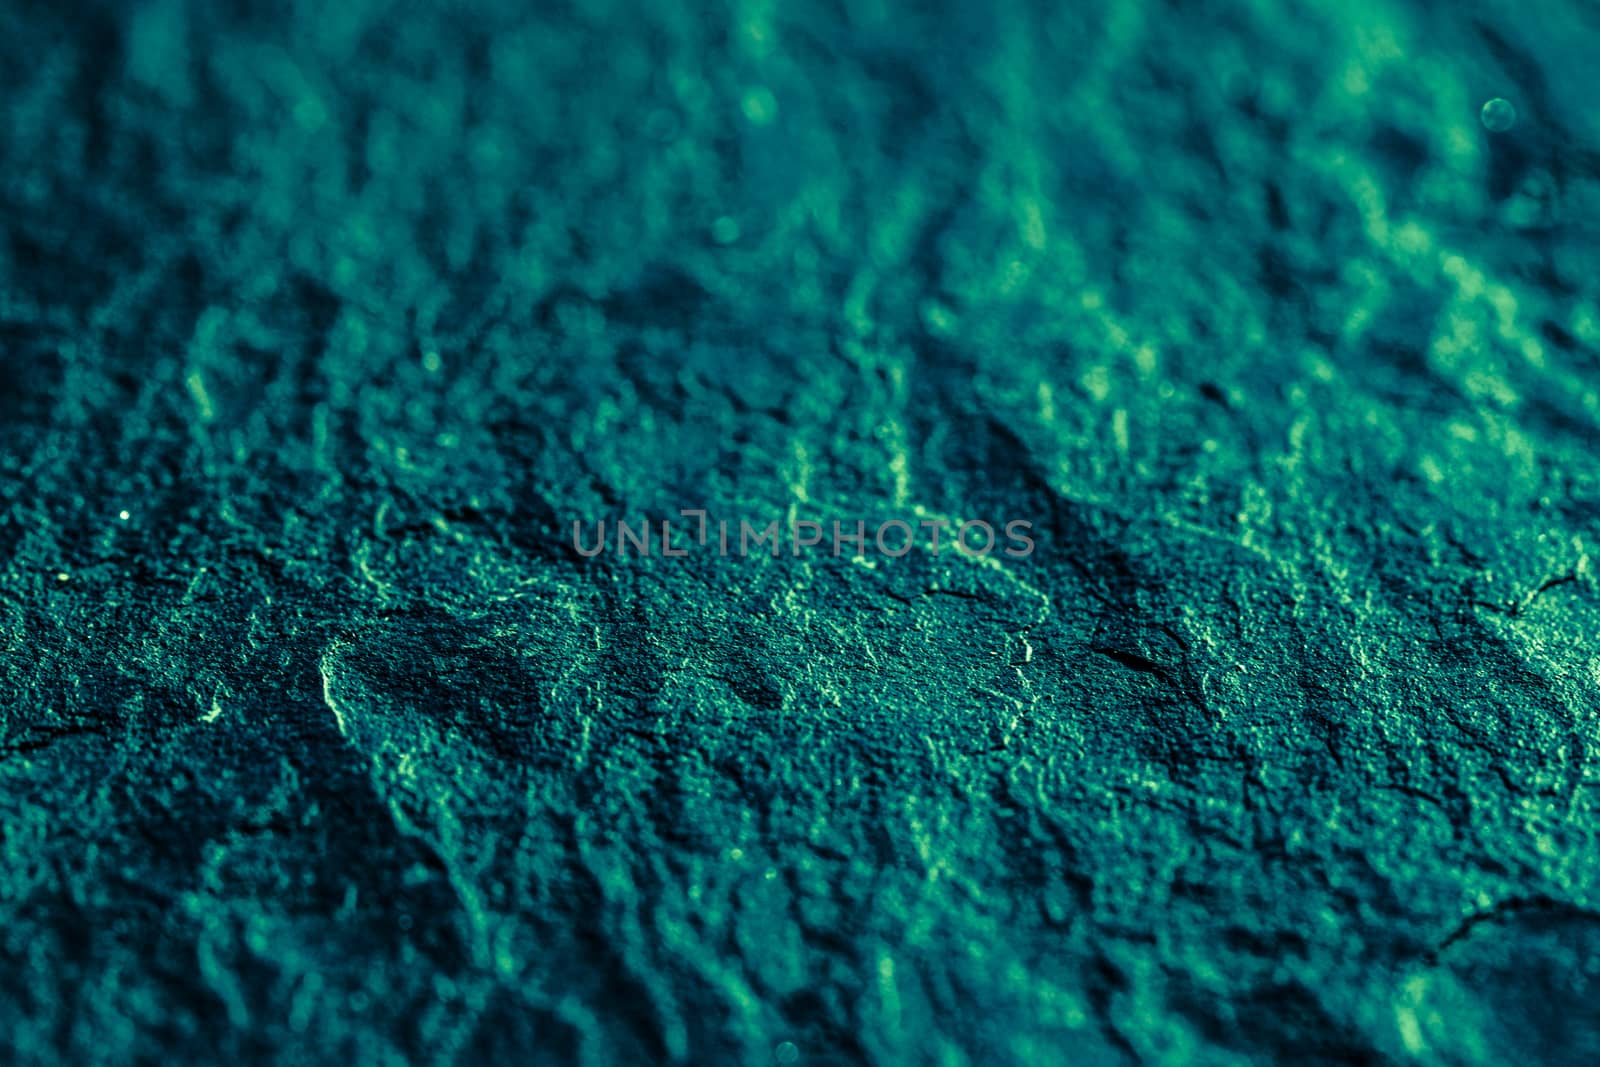 Emerald green stone texture as abstract background, design material and textured surfaces